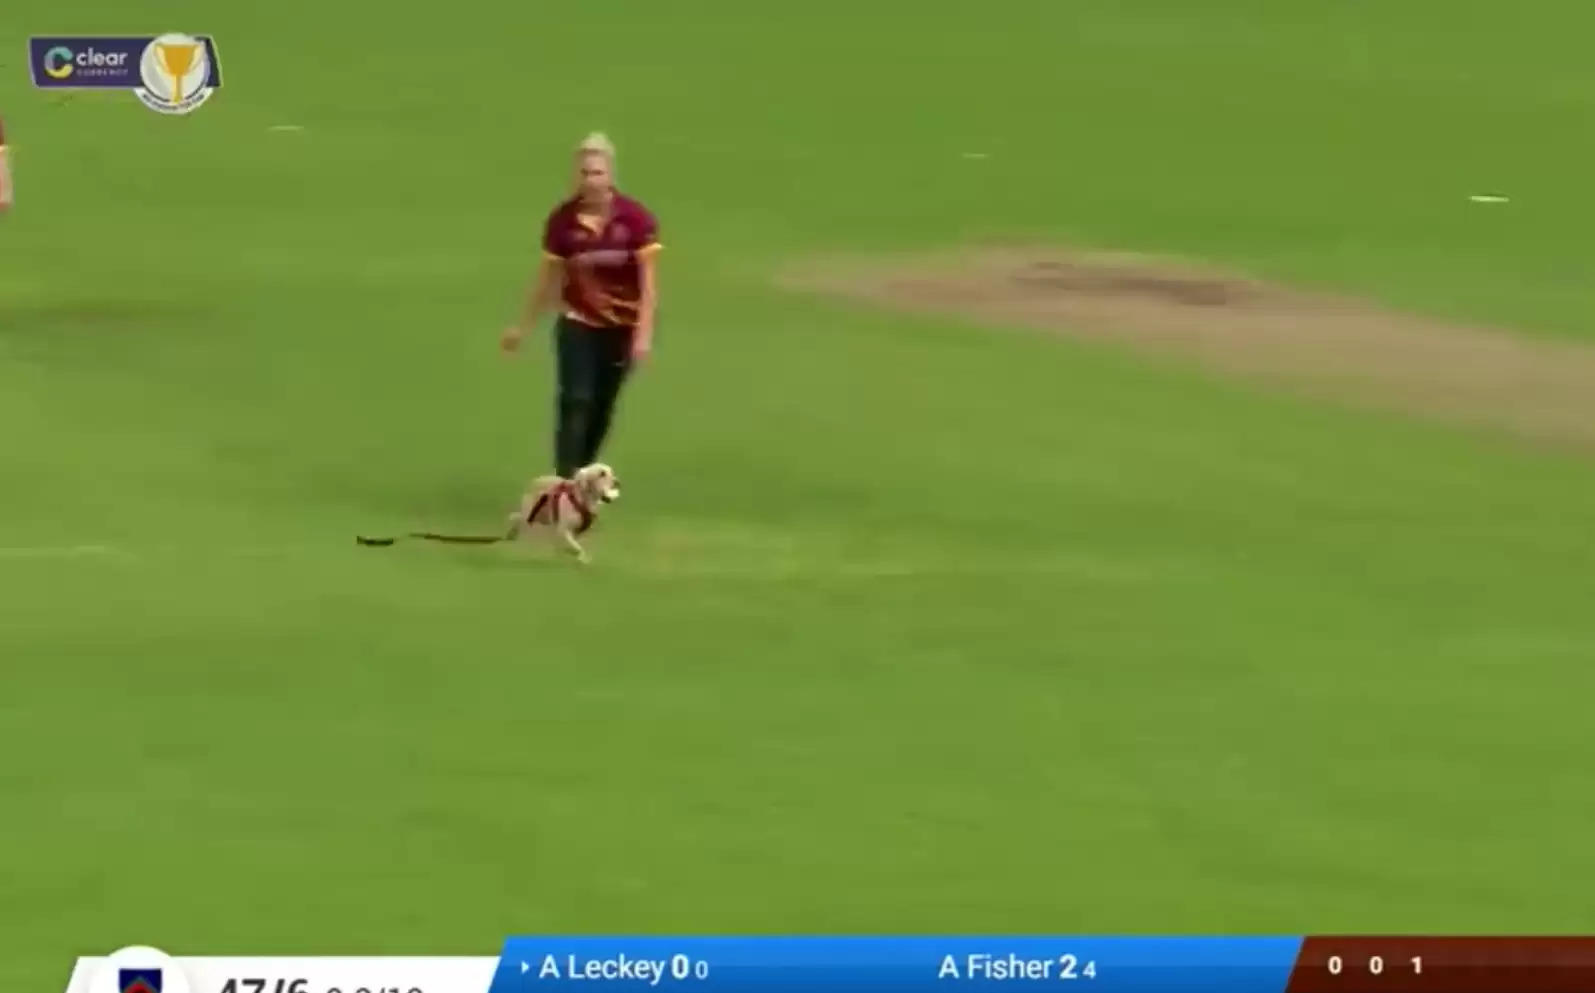 Watch: Dog invades pitch, runs away with the ball in Ireland women’s T20 Cup